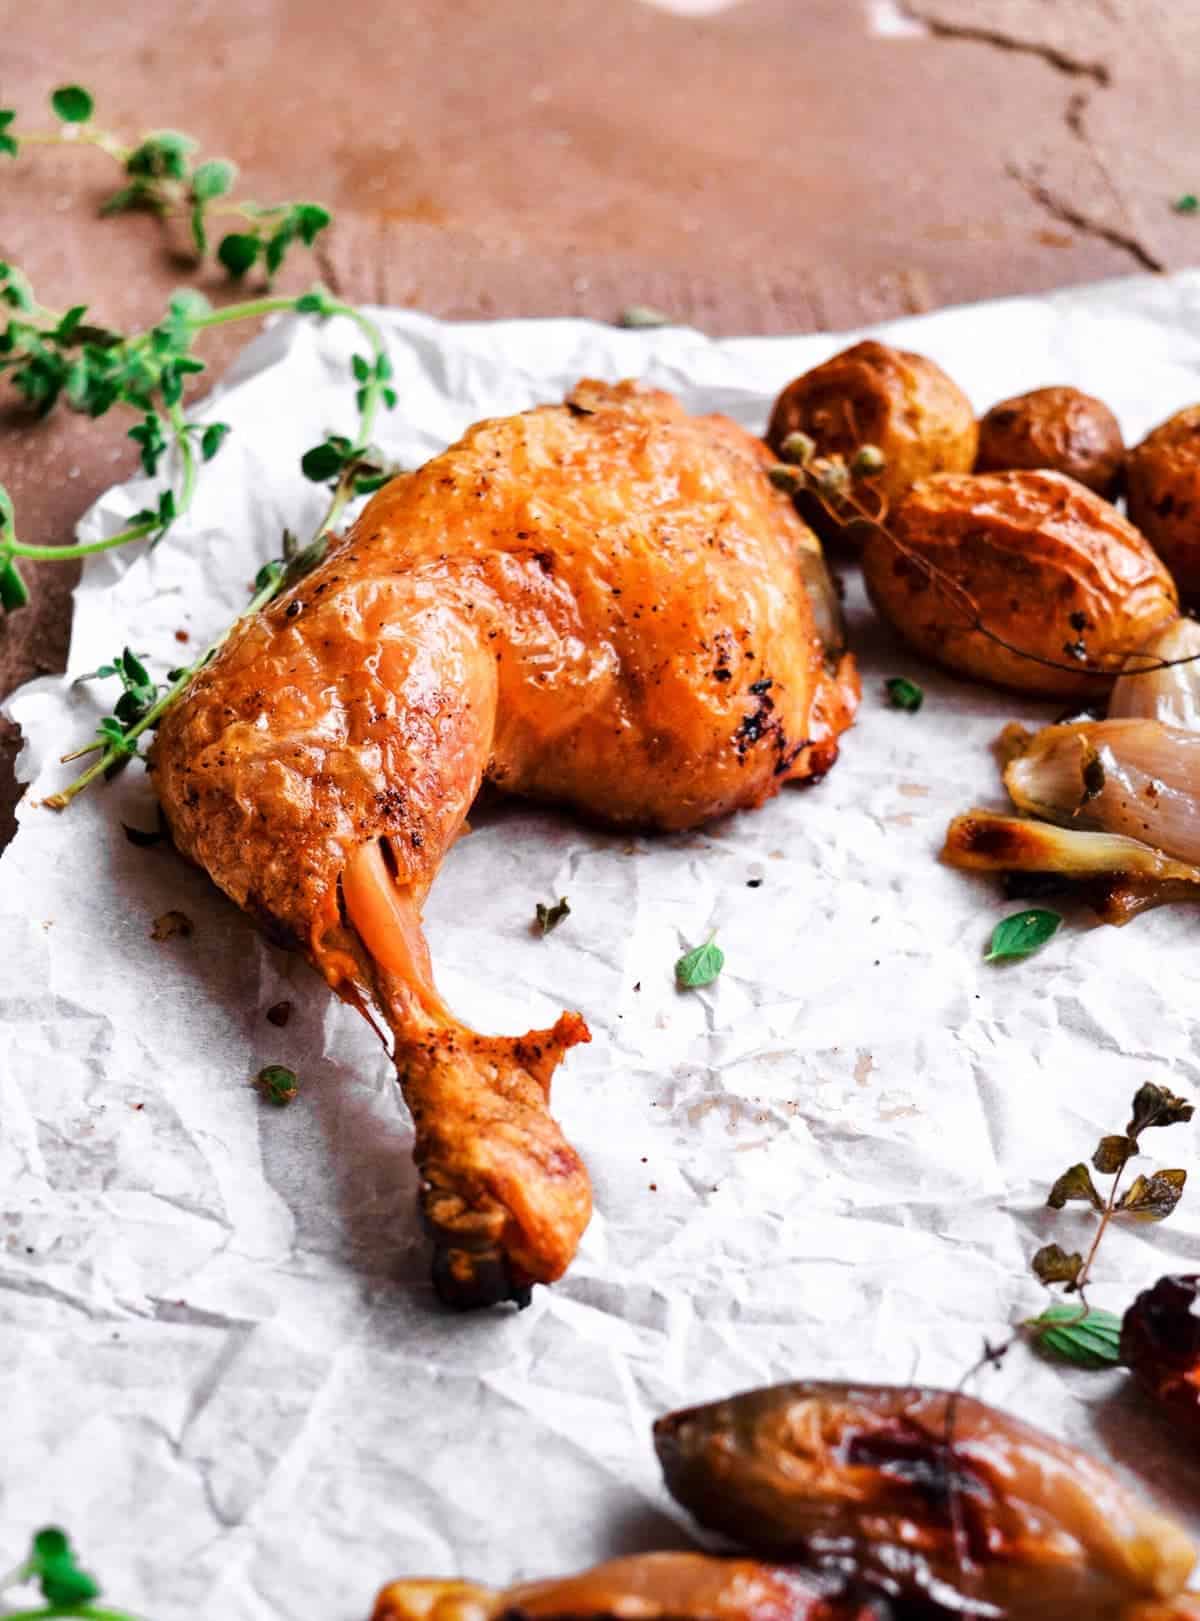 Baked chicken on parchment paper